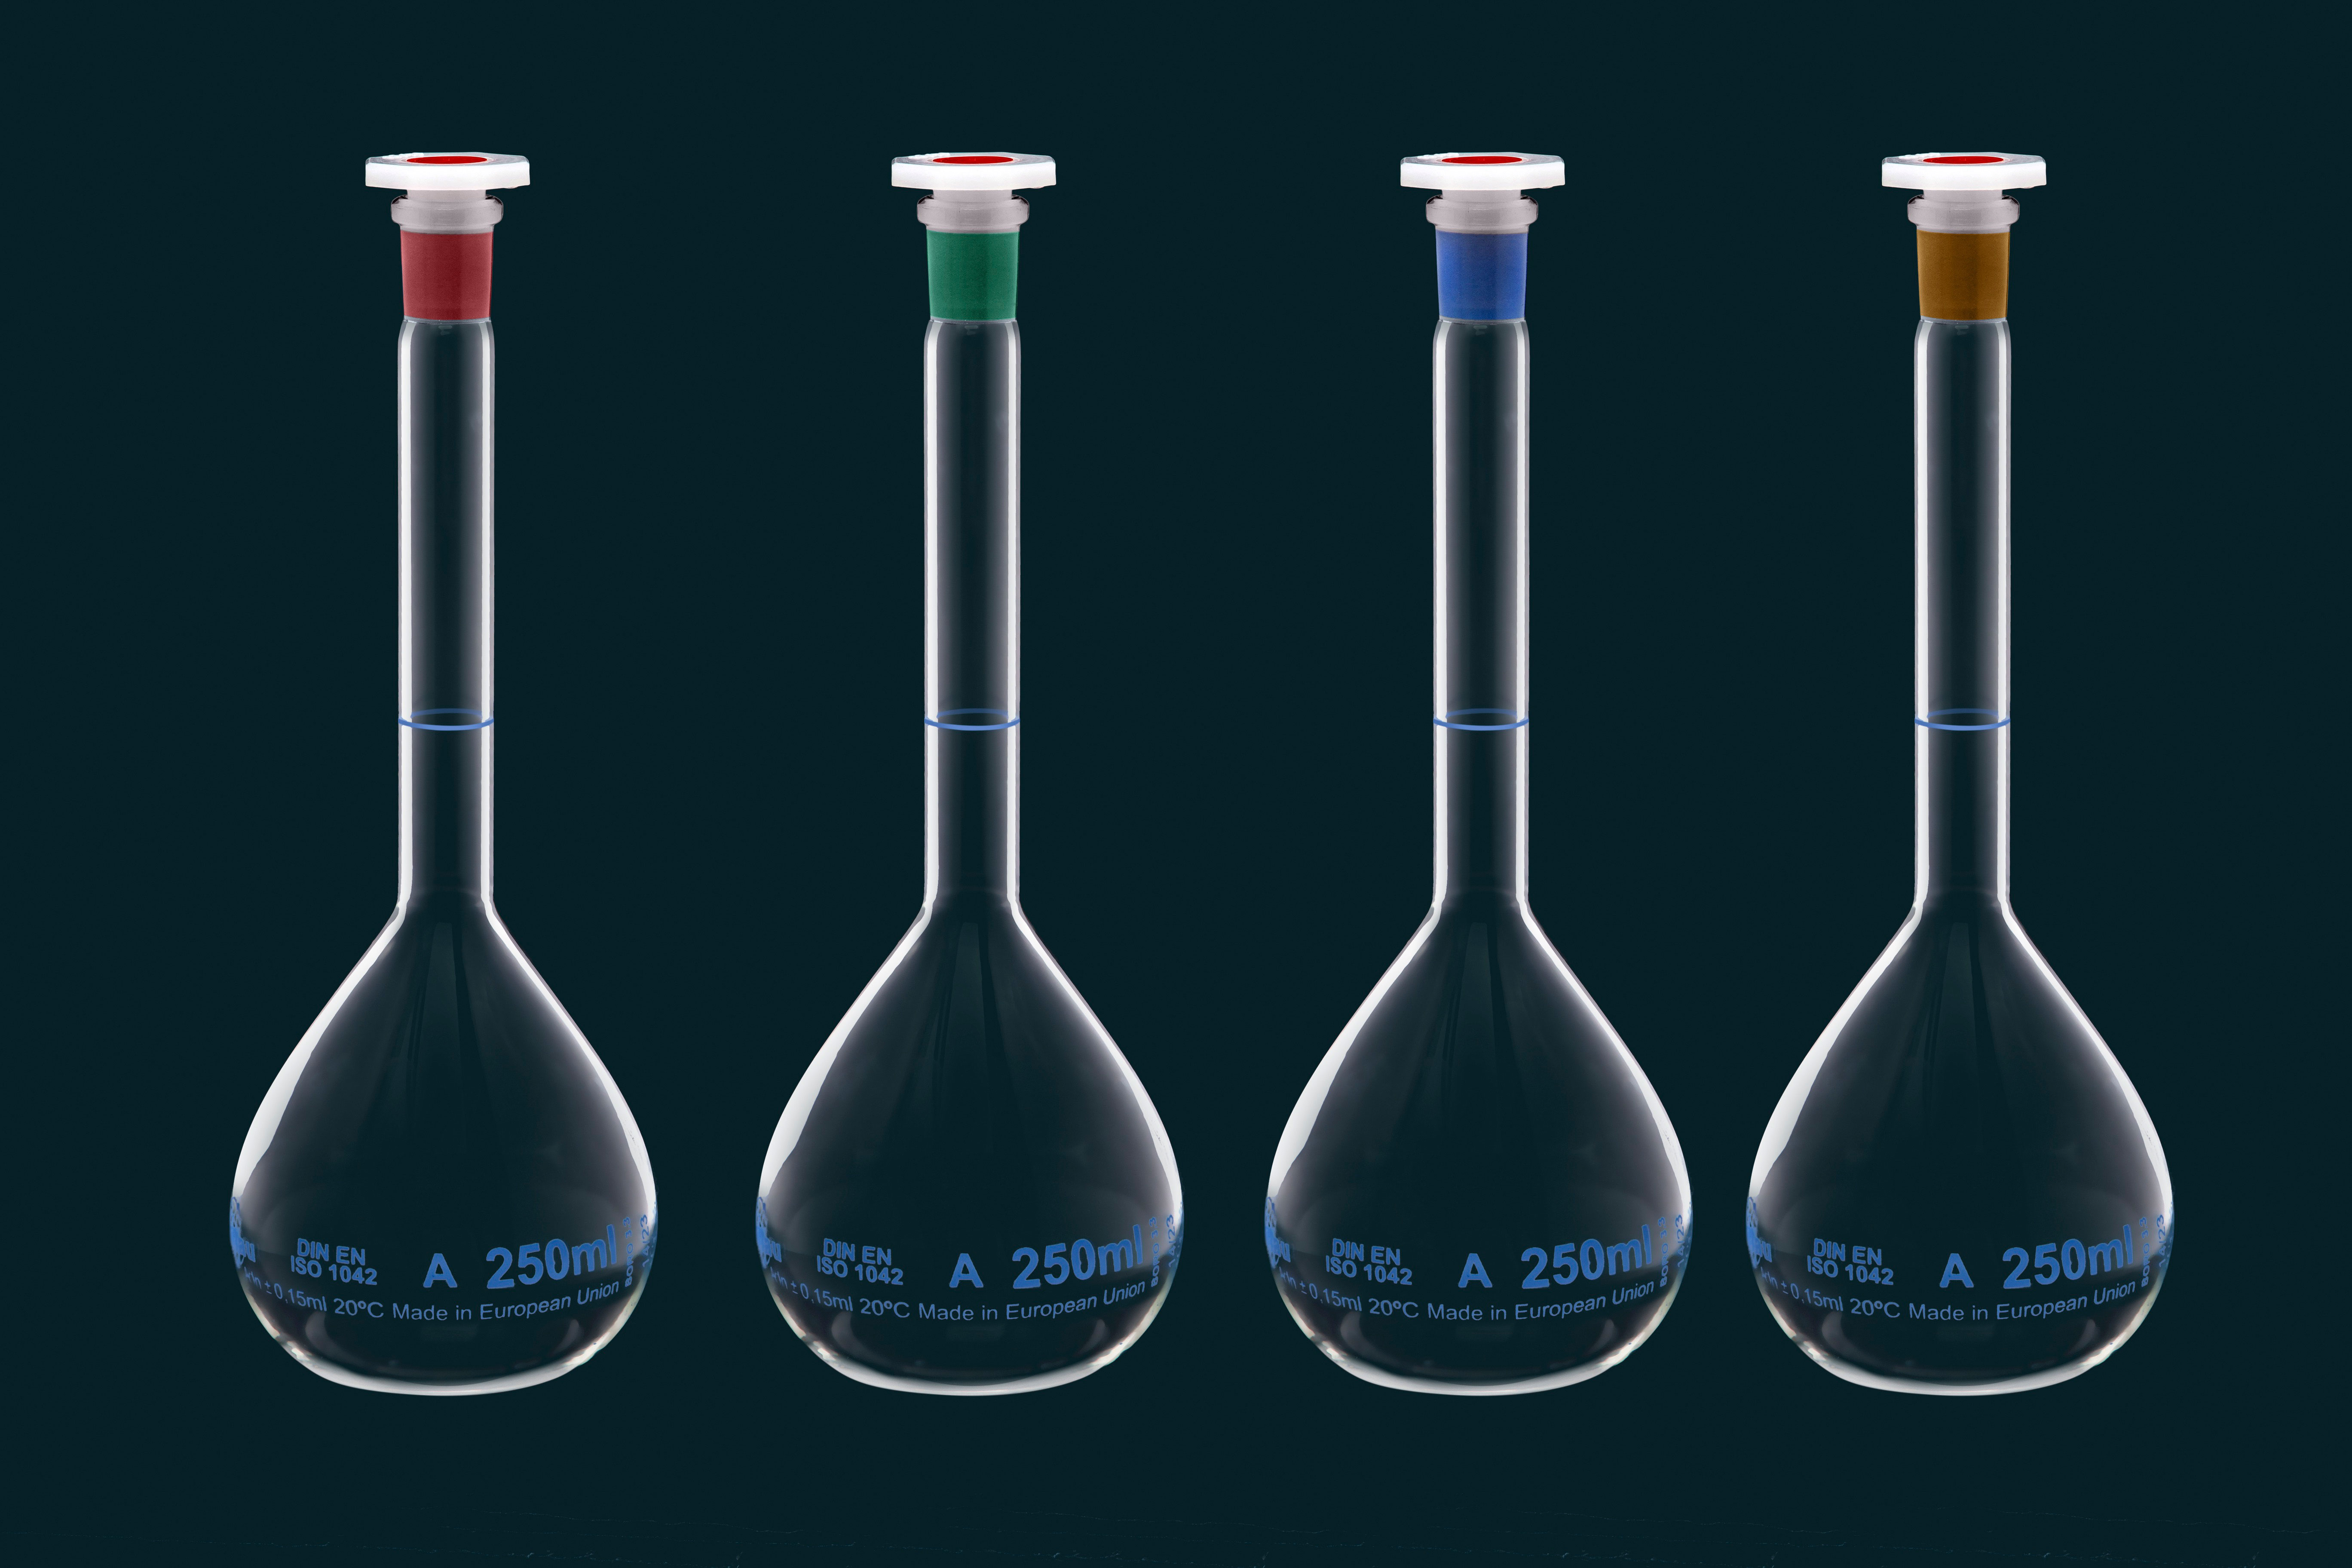 Volumetric flask with green neck, Class A, 500ml, with PE stopper, lot number and certificate of conformity